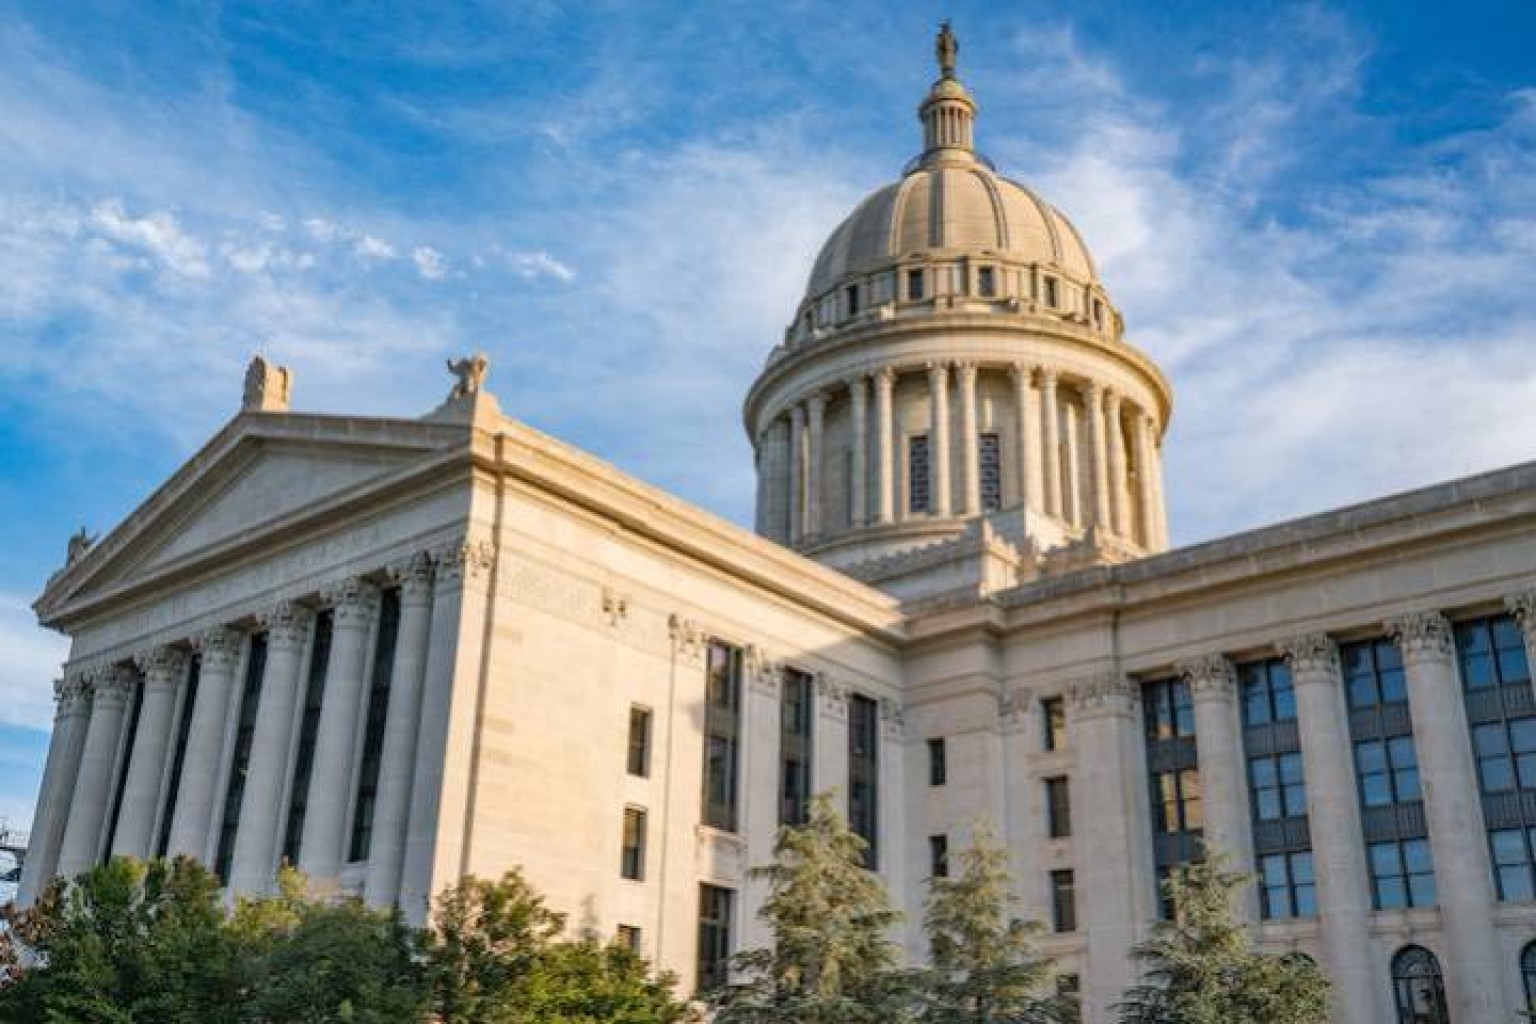 GOVERNOR STITT WILL NOT APPEAL THE U.S. DISTRICT COURT RULING ON GAMING COMPACTS